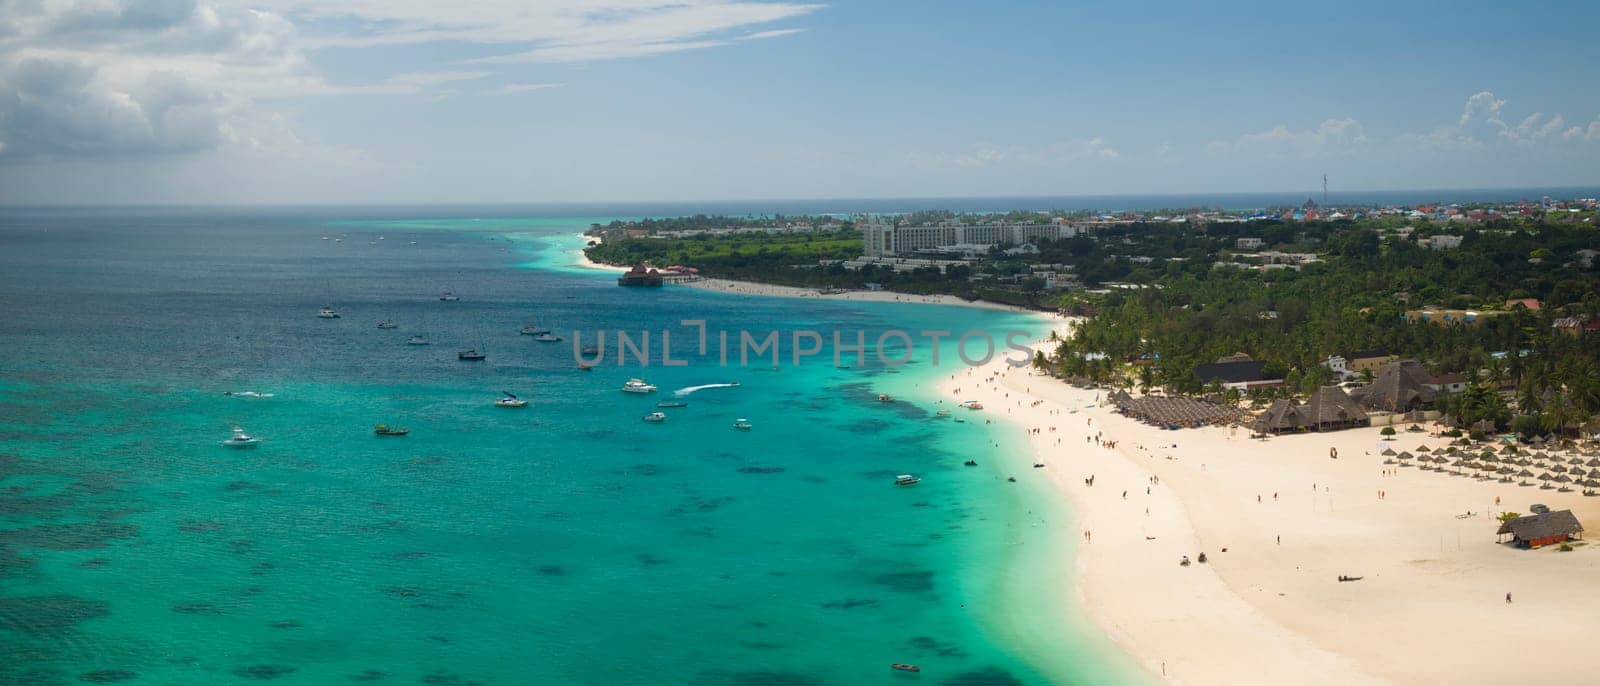 Zanzibar beach where tourists and locals mix together of colors and joy, concept of summer vacation, aerial view of Kendwa beach, Tanzania